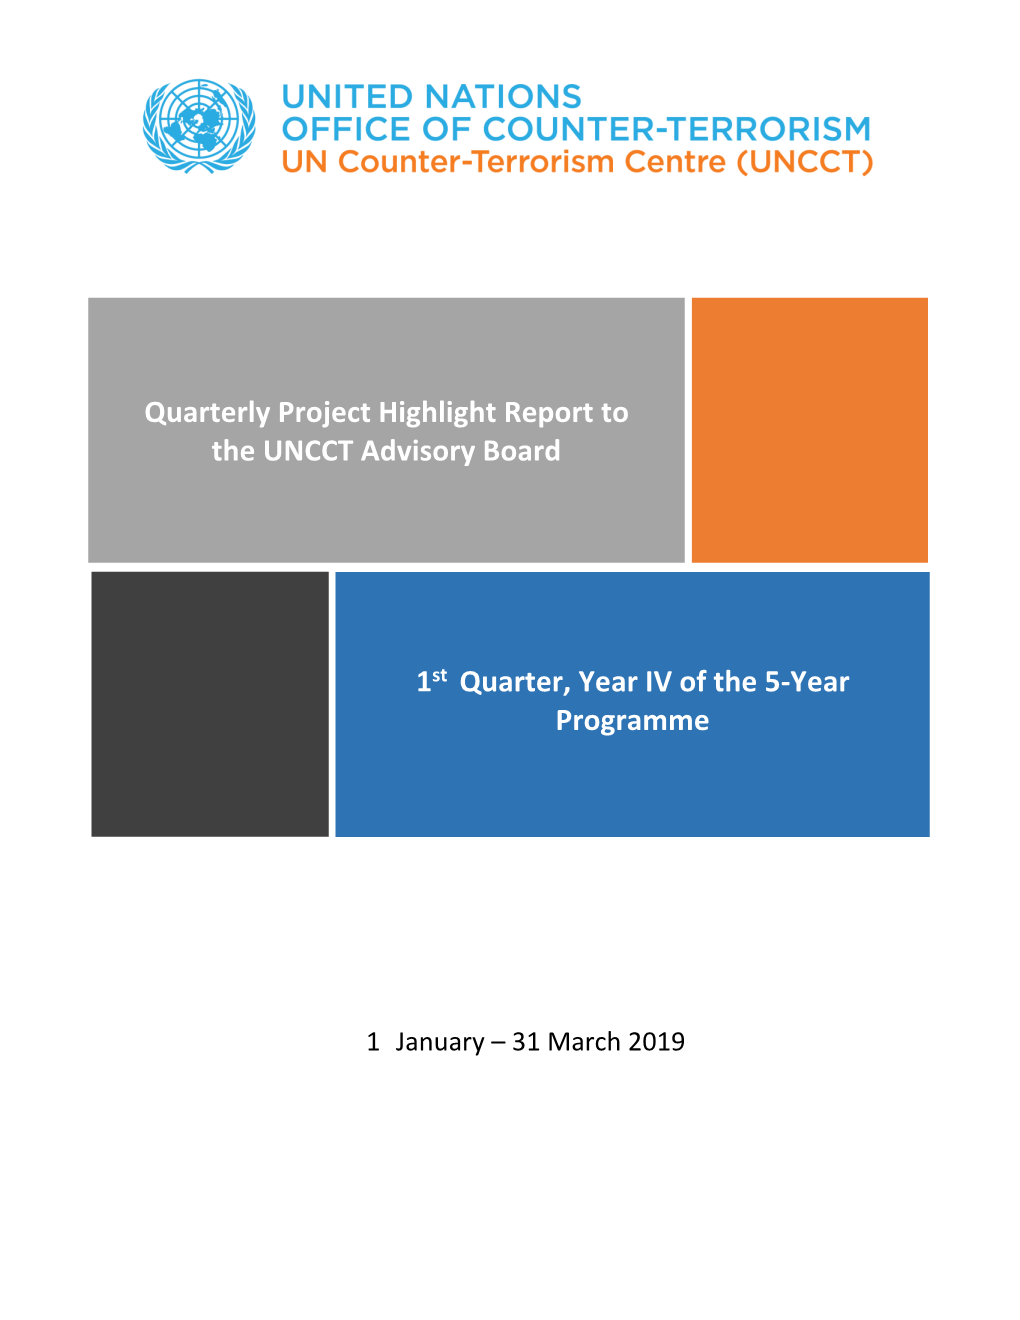 Quarterly Project Highlight Report to the UNCCT Advisory Board 1St Quarter, Year IV of the 5-Year Programme